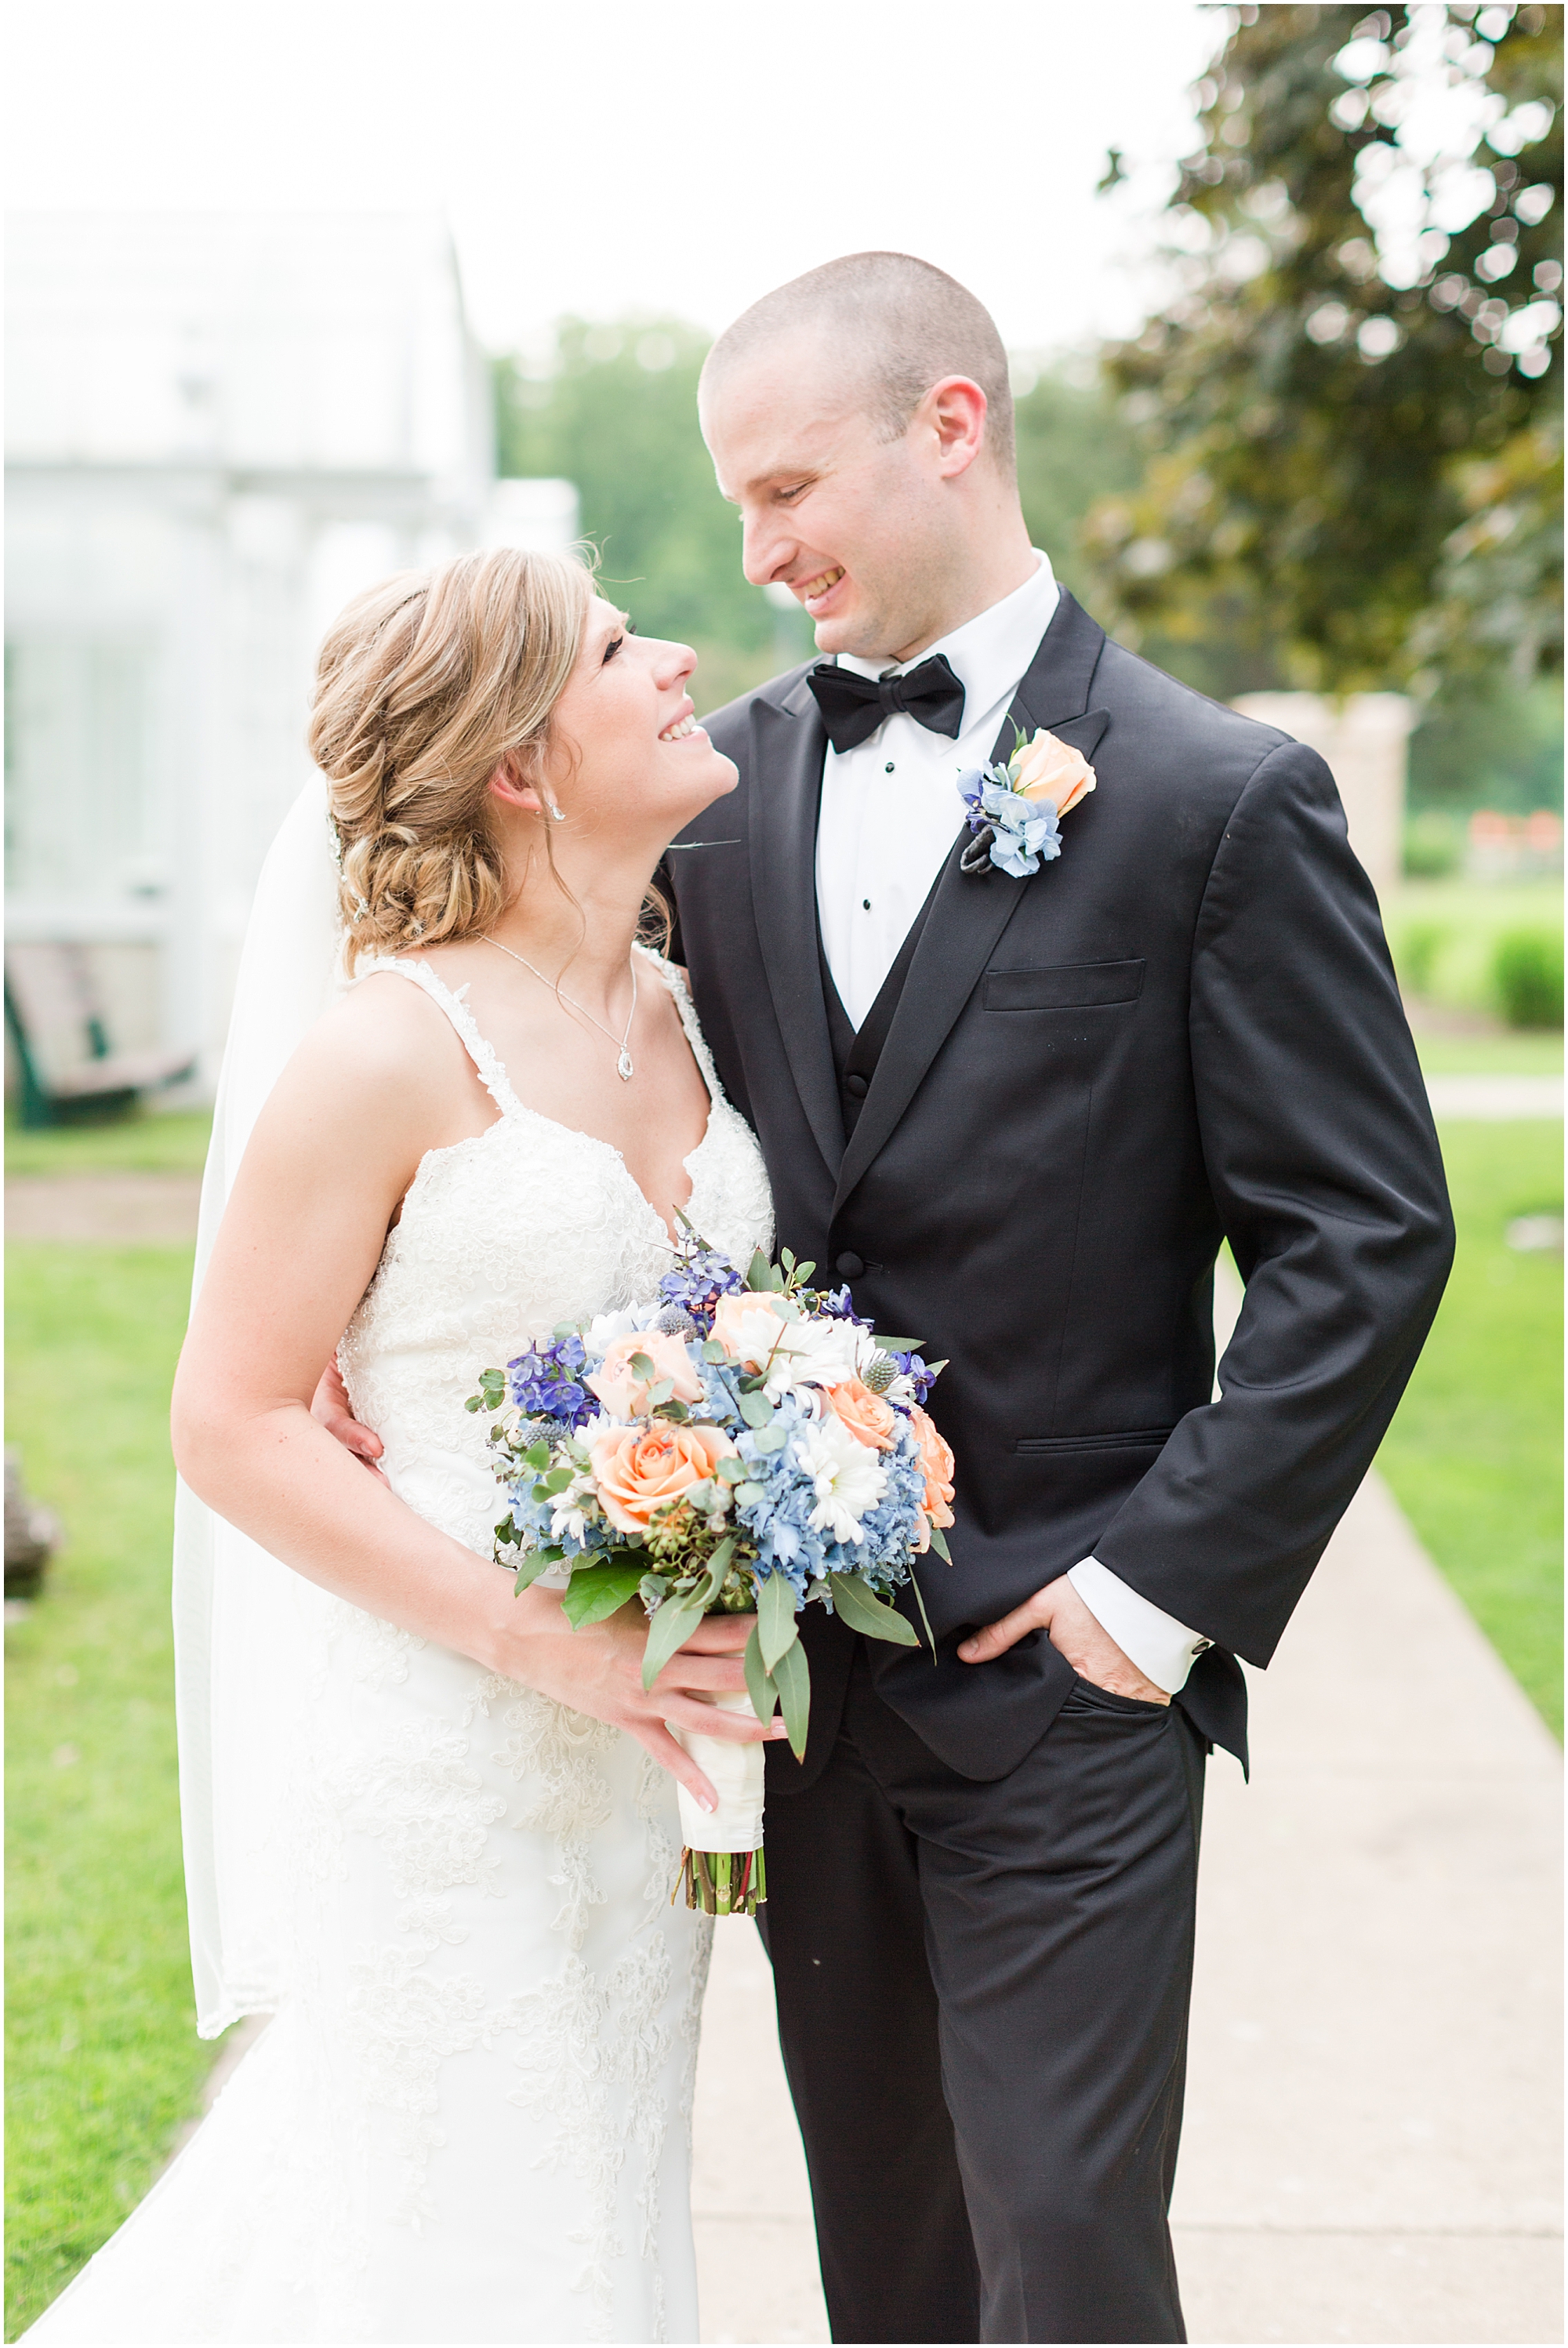 A Stunning Summer Wedding at Bird Haven Greenhouse & Conservatory in Joliet, IL by Rachael Watson Photography